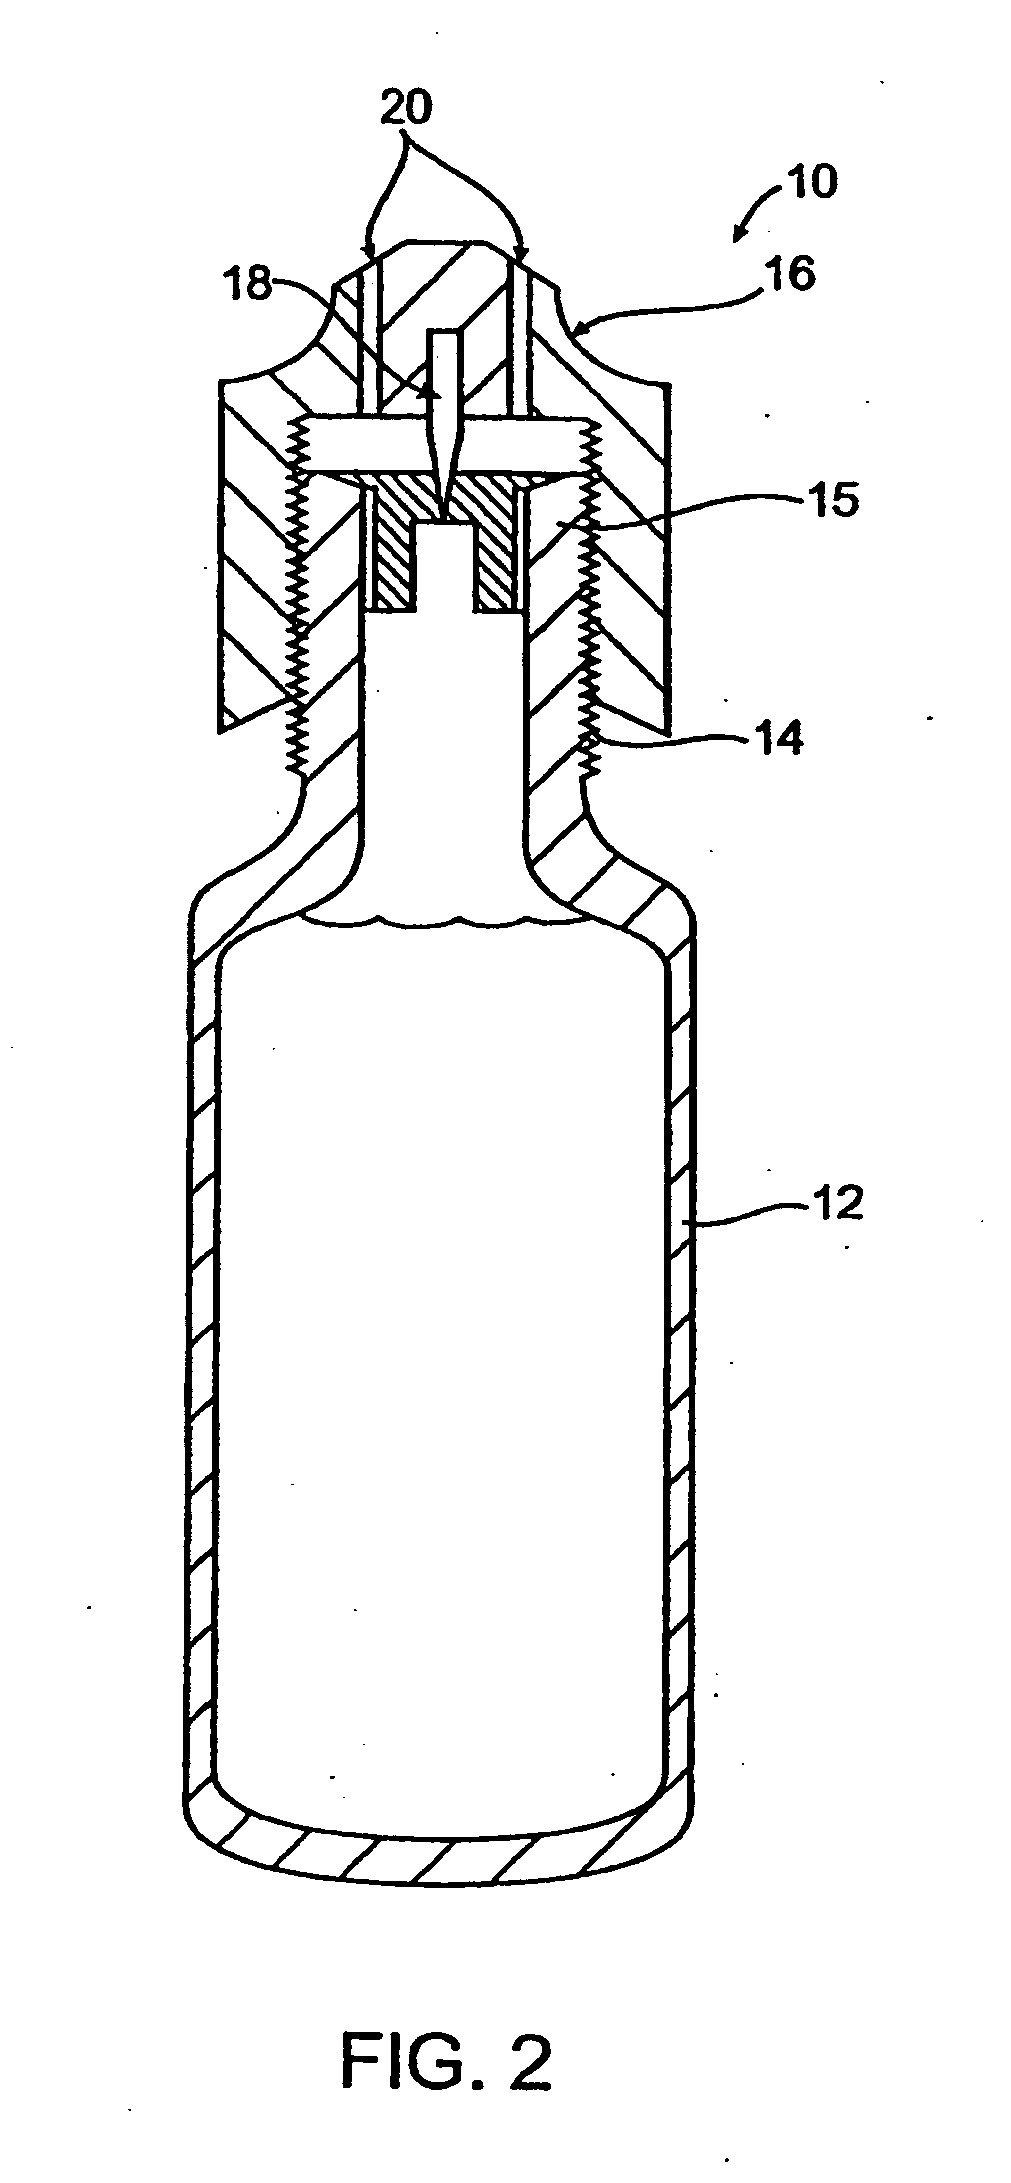 Methods and apparatus for relieving headaches, rhinitis and other common ailments